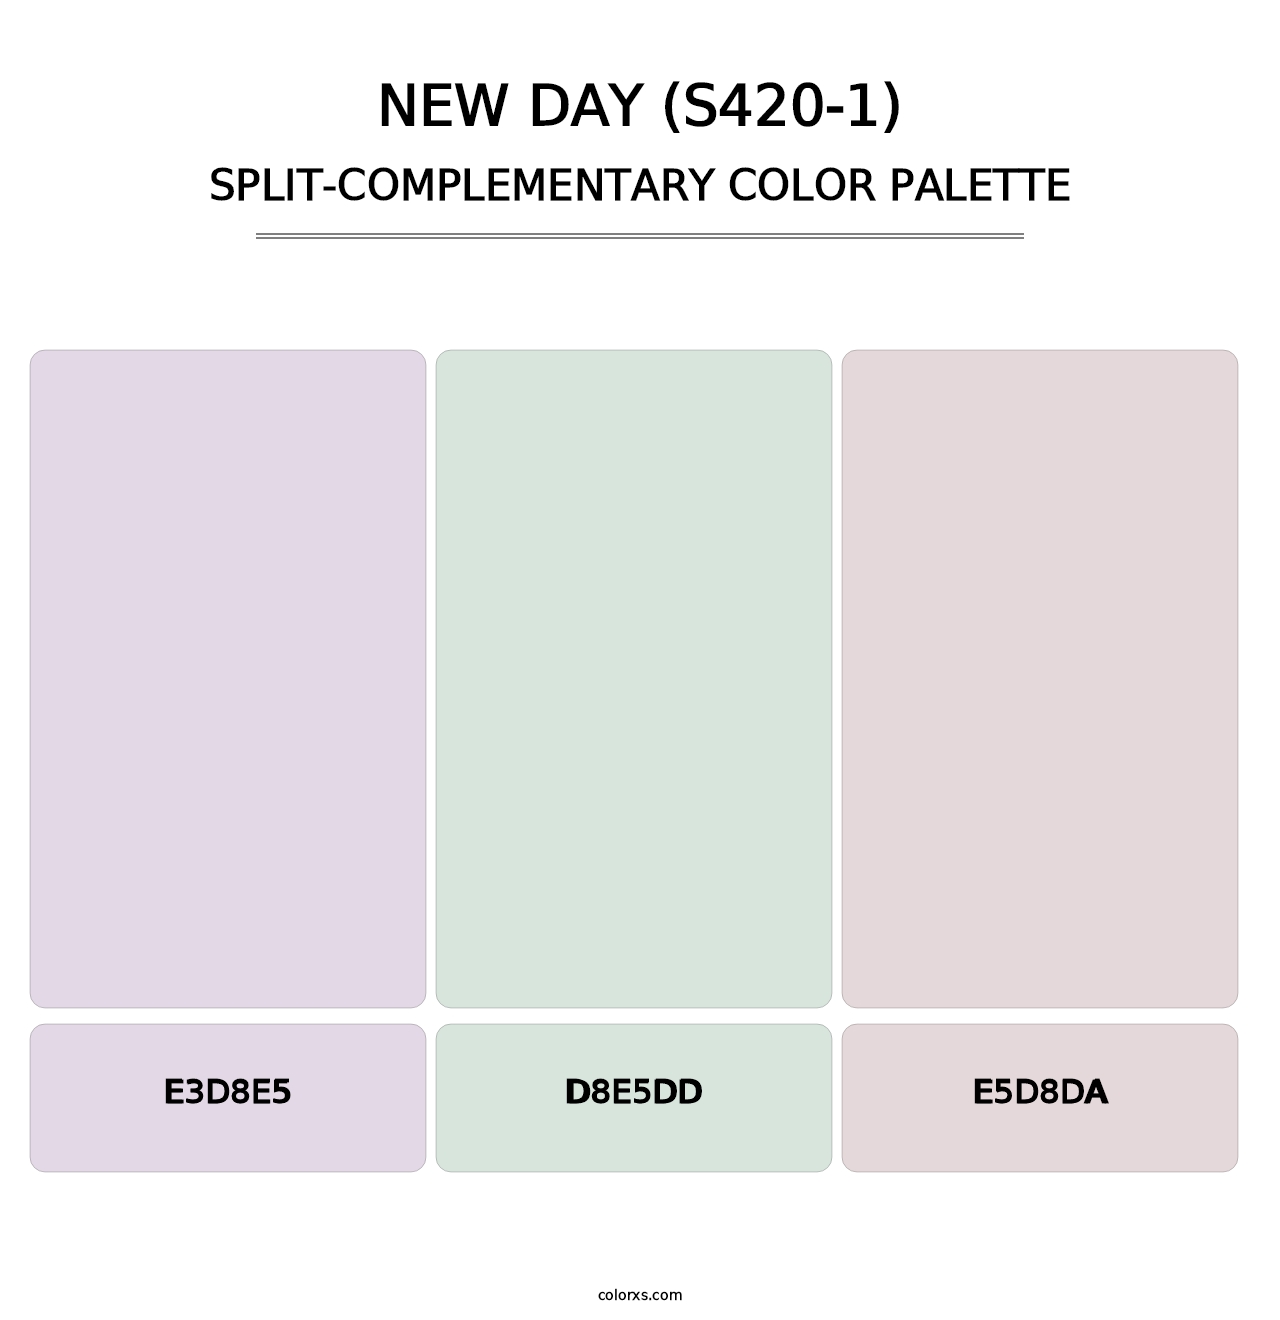 New Day (S420-1) - Split-Complementary Color Palette